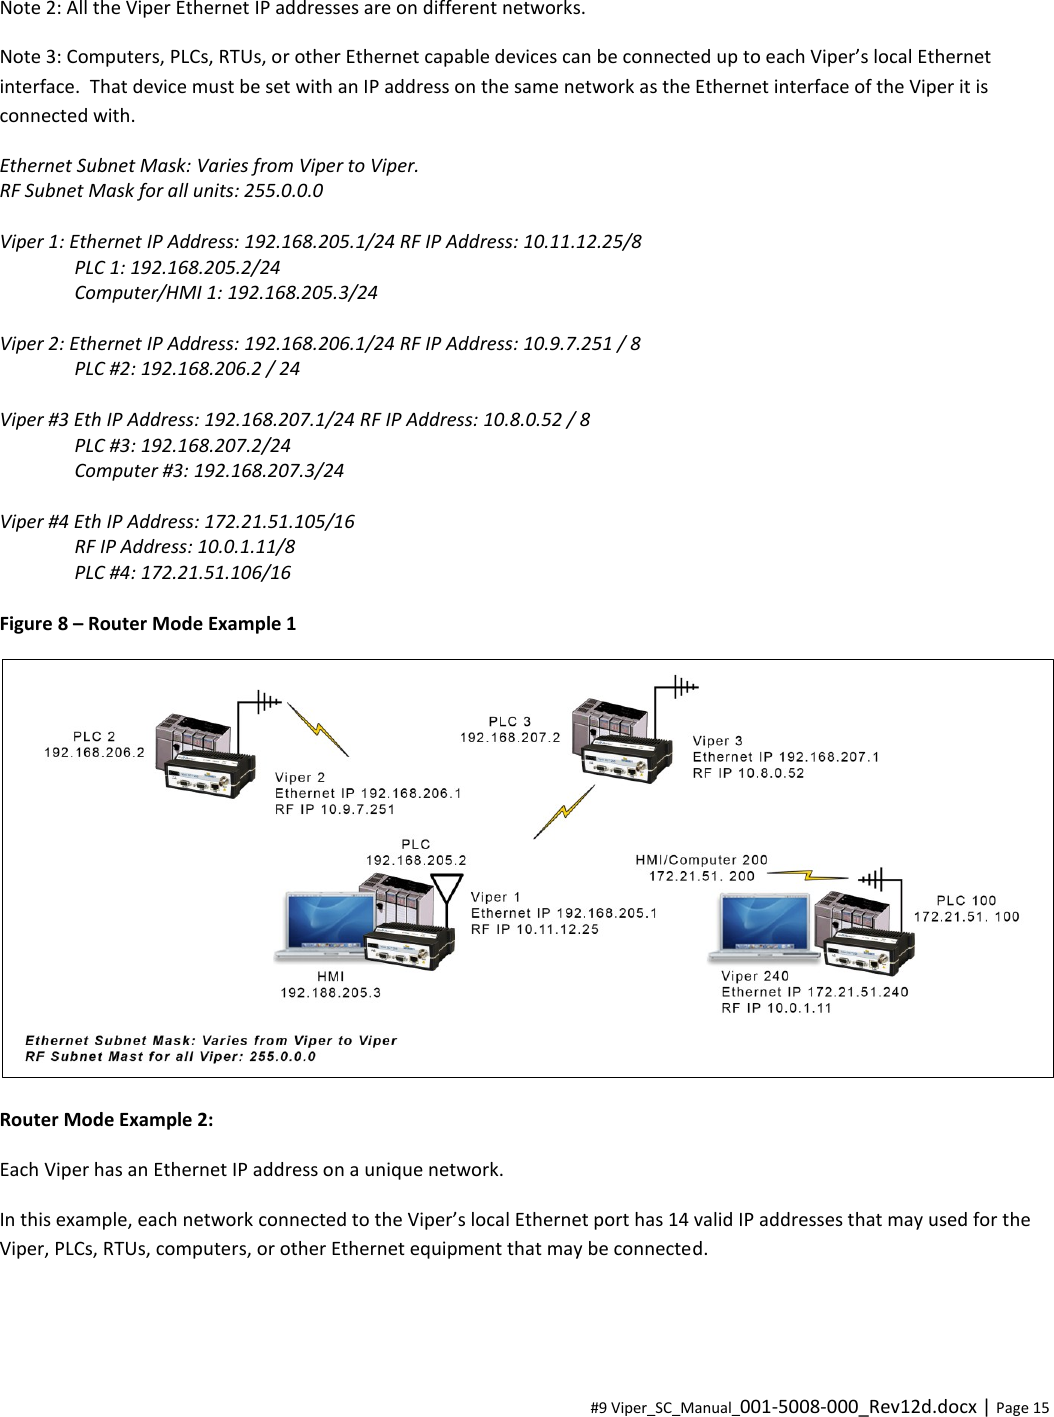  #9 Viper_SC_Manual_001-5008-000_Rev12d.docx | Page 15 Note 2: All the Viper Ethernet IP addresses are on different networks. Note 3: Computers, PLCs, RTUs, or other Ethernet capable devices can be connected up to each Viper’s local Ethernet interface.  That device must be set with an IP address on the same network as the Ethernet interface of the Viper it is connected with. Ethernet Subnet Mask: Varies from Viper to Viper. RF Subnet Mask for all units: 255.0.0.0  Viper 1: Ethernet IP Address: 192.168.205.1/24 RF IP Address: 10.11.12.25/8 PLC 1: 192.168.205.2/24 Computer/HMI 1: 192.168.205.3/24  Viper 2: Ethernet IP Address: 192.168.206.1/24 RF IP Address: 10.9.7.251 / 8 PLC #2: 192.168.206.2 / 24  Viper #3 Eth IP Address: 192.168.207.1/24 RF IP Address: 10.8.0.52 / 8   PLC #3: 192.168.207.2/24   Computer #3: 192.168.207.3/24  Viper #4 Eth IP Address: 172.21.51.105/16 RF IP Address: 10.0.1.11/8   PLC #4: 172.21.51.106/16  Figure 8 – Router Mode Example 1  Router Mode Example 2:  Each Viper has an Ethernet IP address on a unique network. In this example, each network connected to the Viper’s local Ethernet port has 14 valid IP addresses that may used for the Viper, PLCs, RTUs, computers, or other Ethernet equipment that may be connected. 